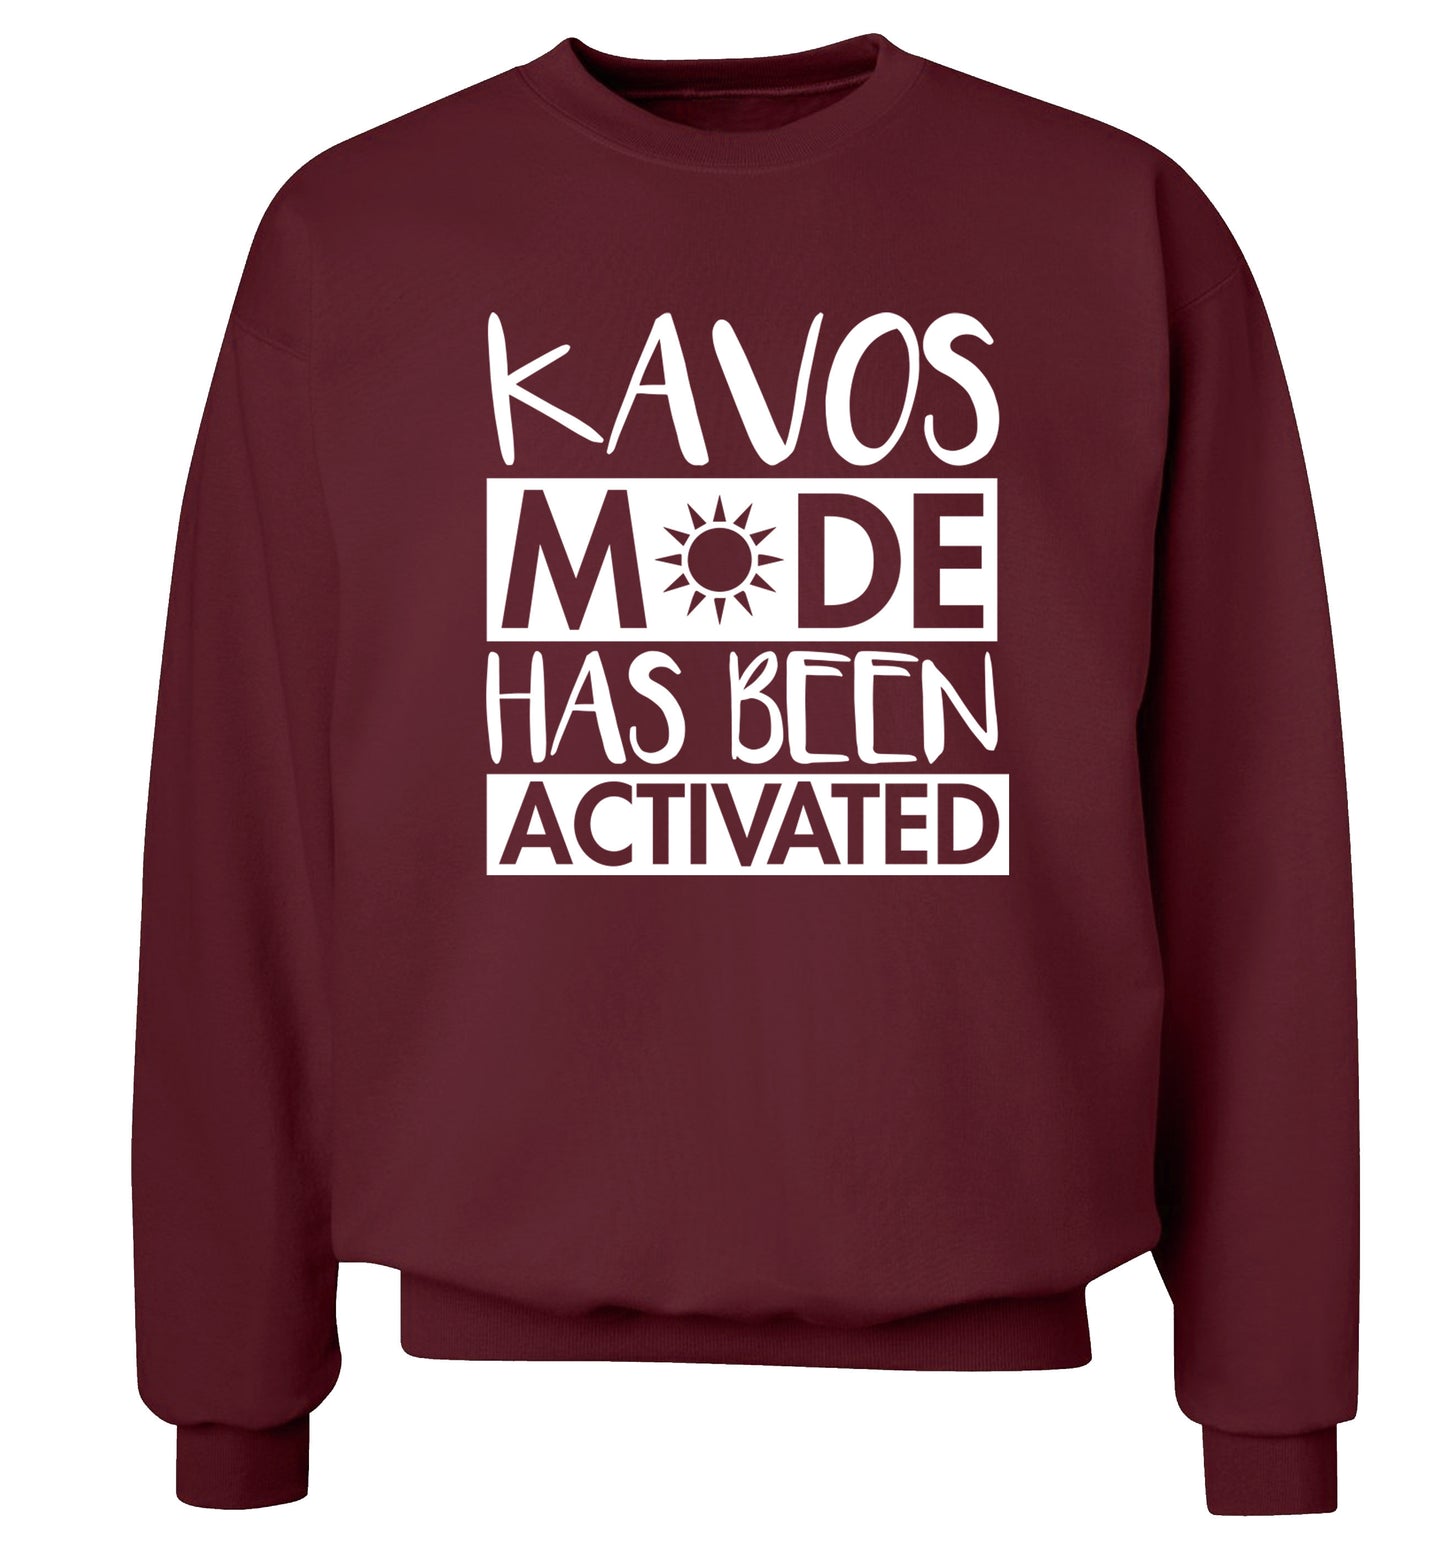 Kavos mode has been activated Adult's unisex maroon Sweater 2XL